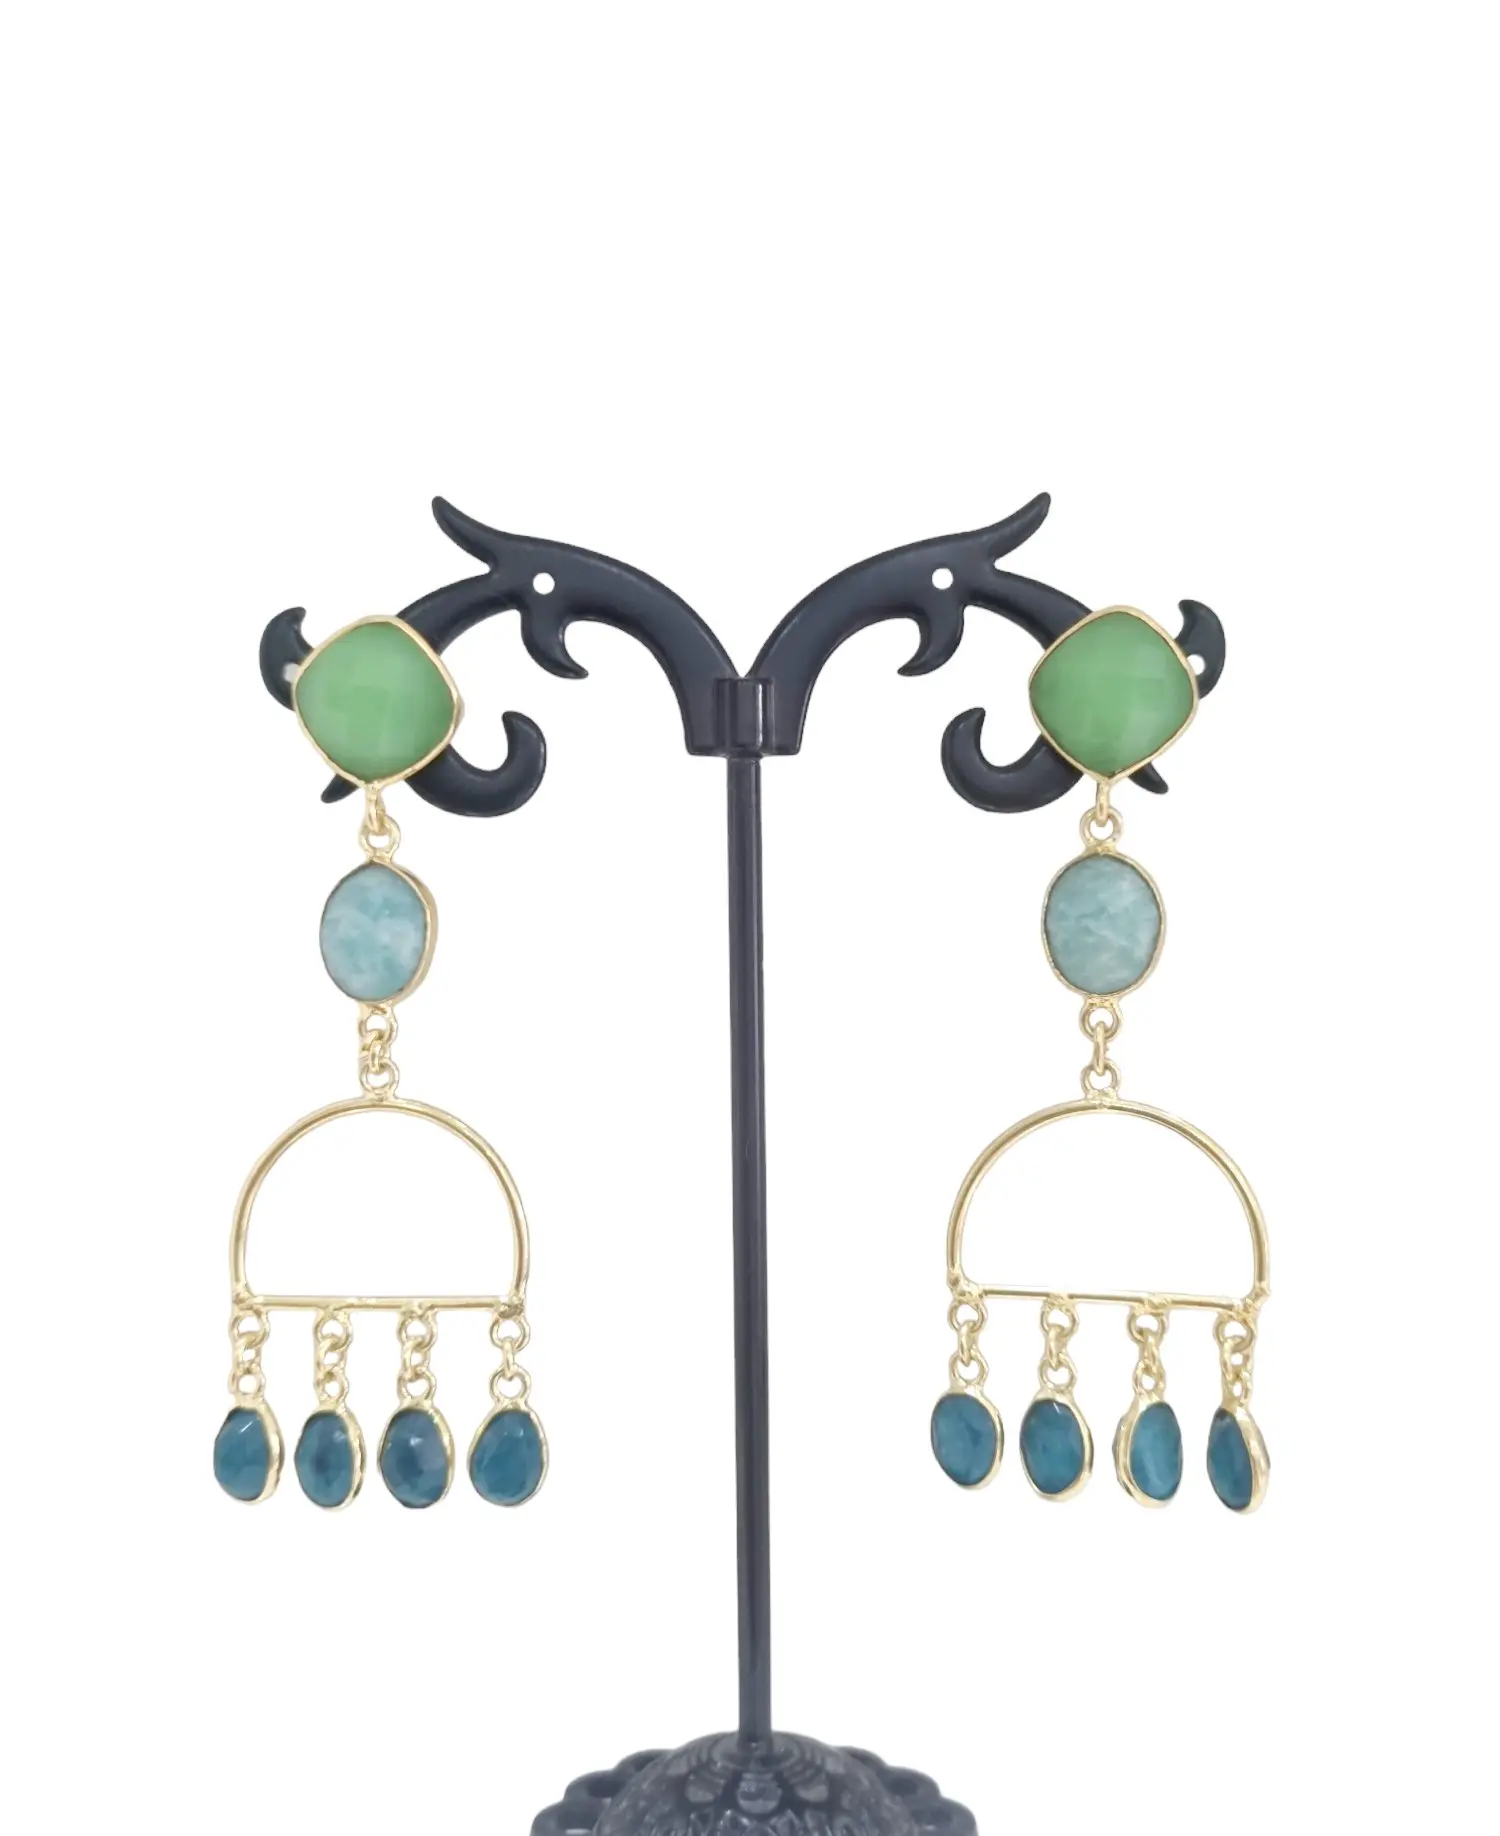 Earrings made with natural stones and brass, length 6cm, weight 4.2g